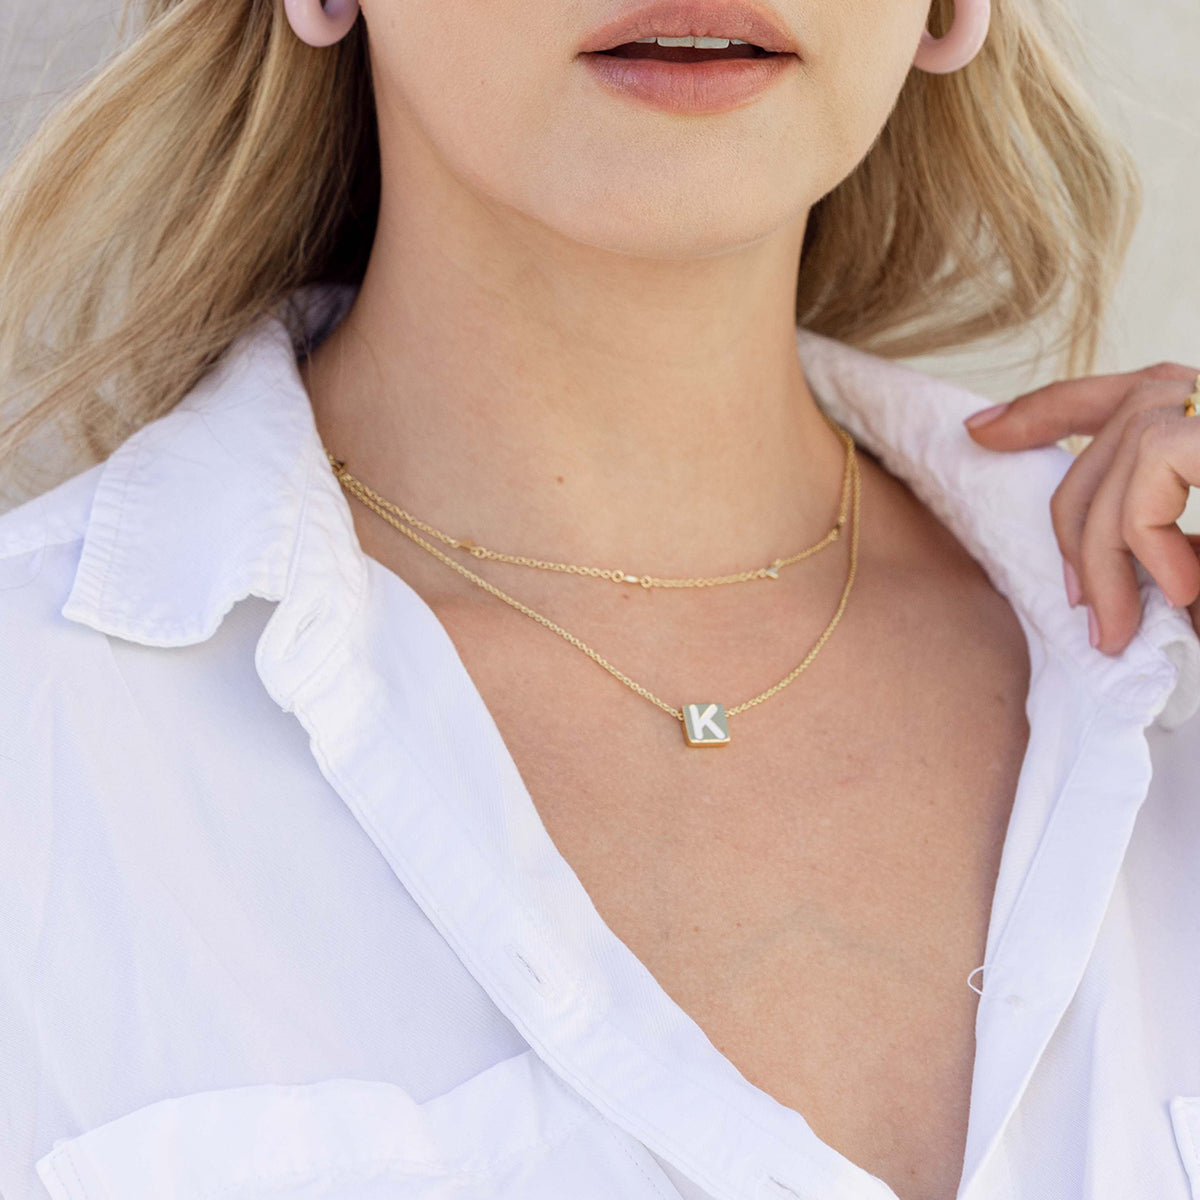 Textured Stud Necklace | Gold | Model Image | Uncommon James